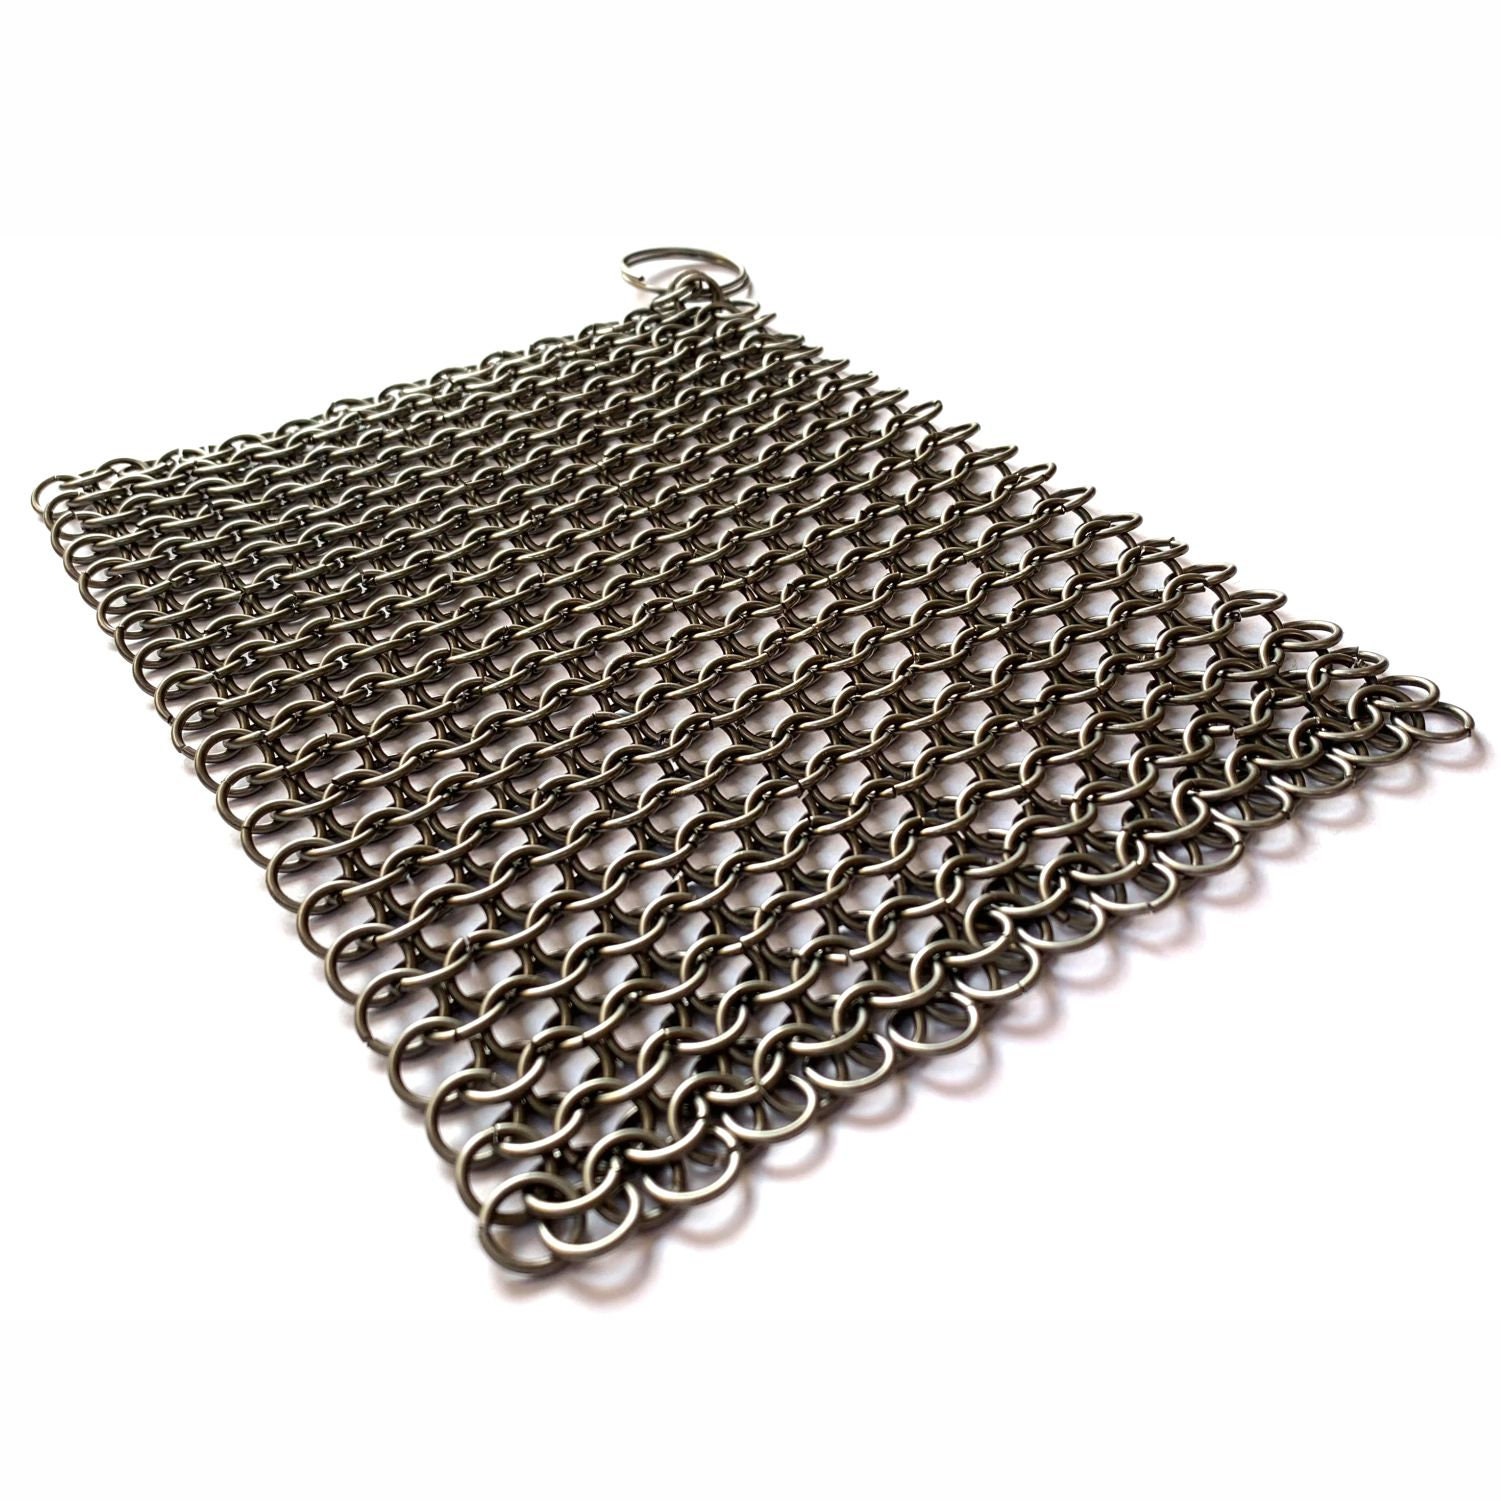 Apollo Premium Cast Iron Skillet Cleaner Stainless Steel Chainmail Scrubber Large Circular Wire Metal Pot Cleaner, Made of Rust Proof Chain Mail